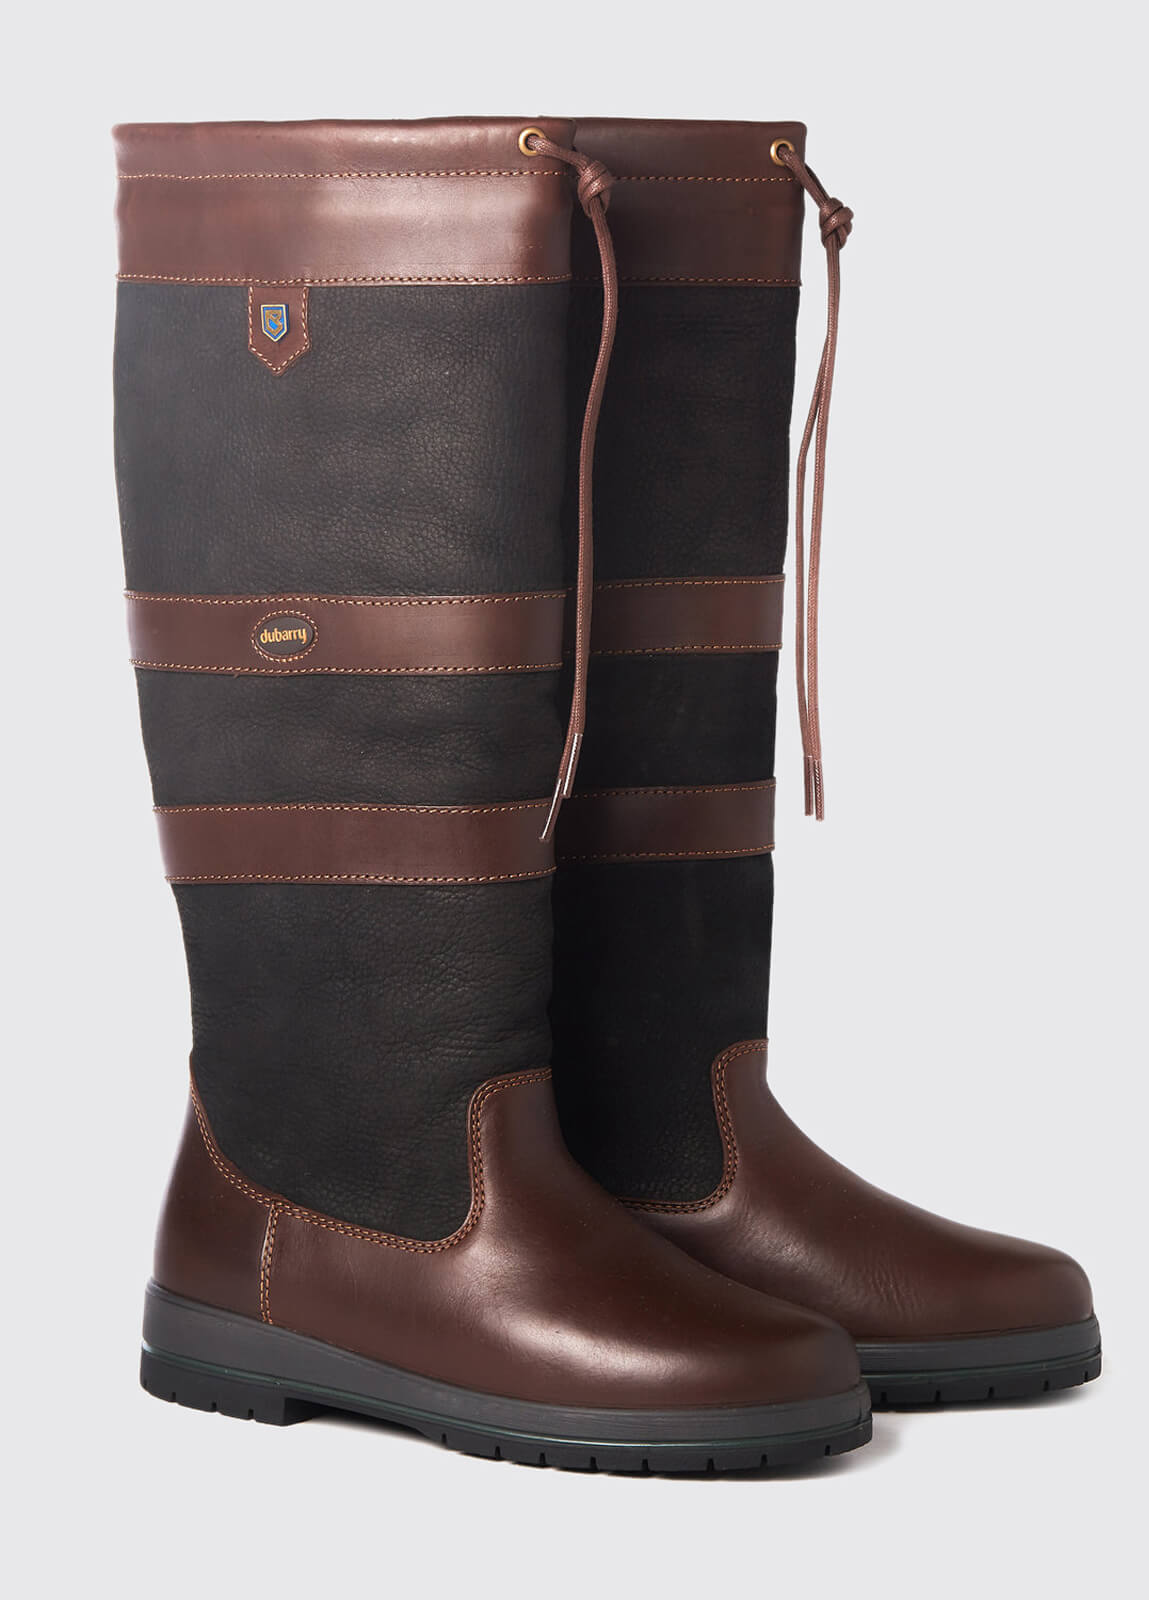 Galway ExtraFit Black/Brown | Dubarry 